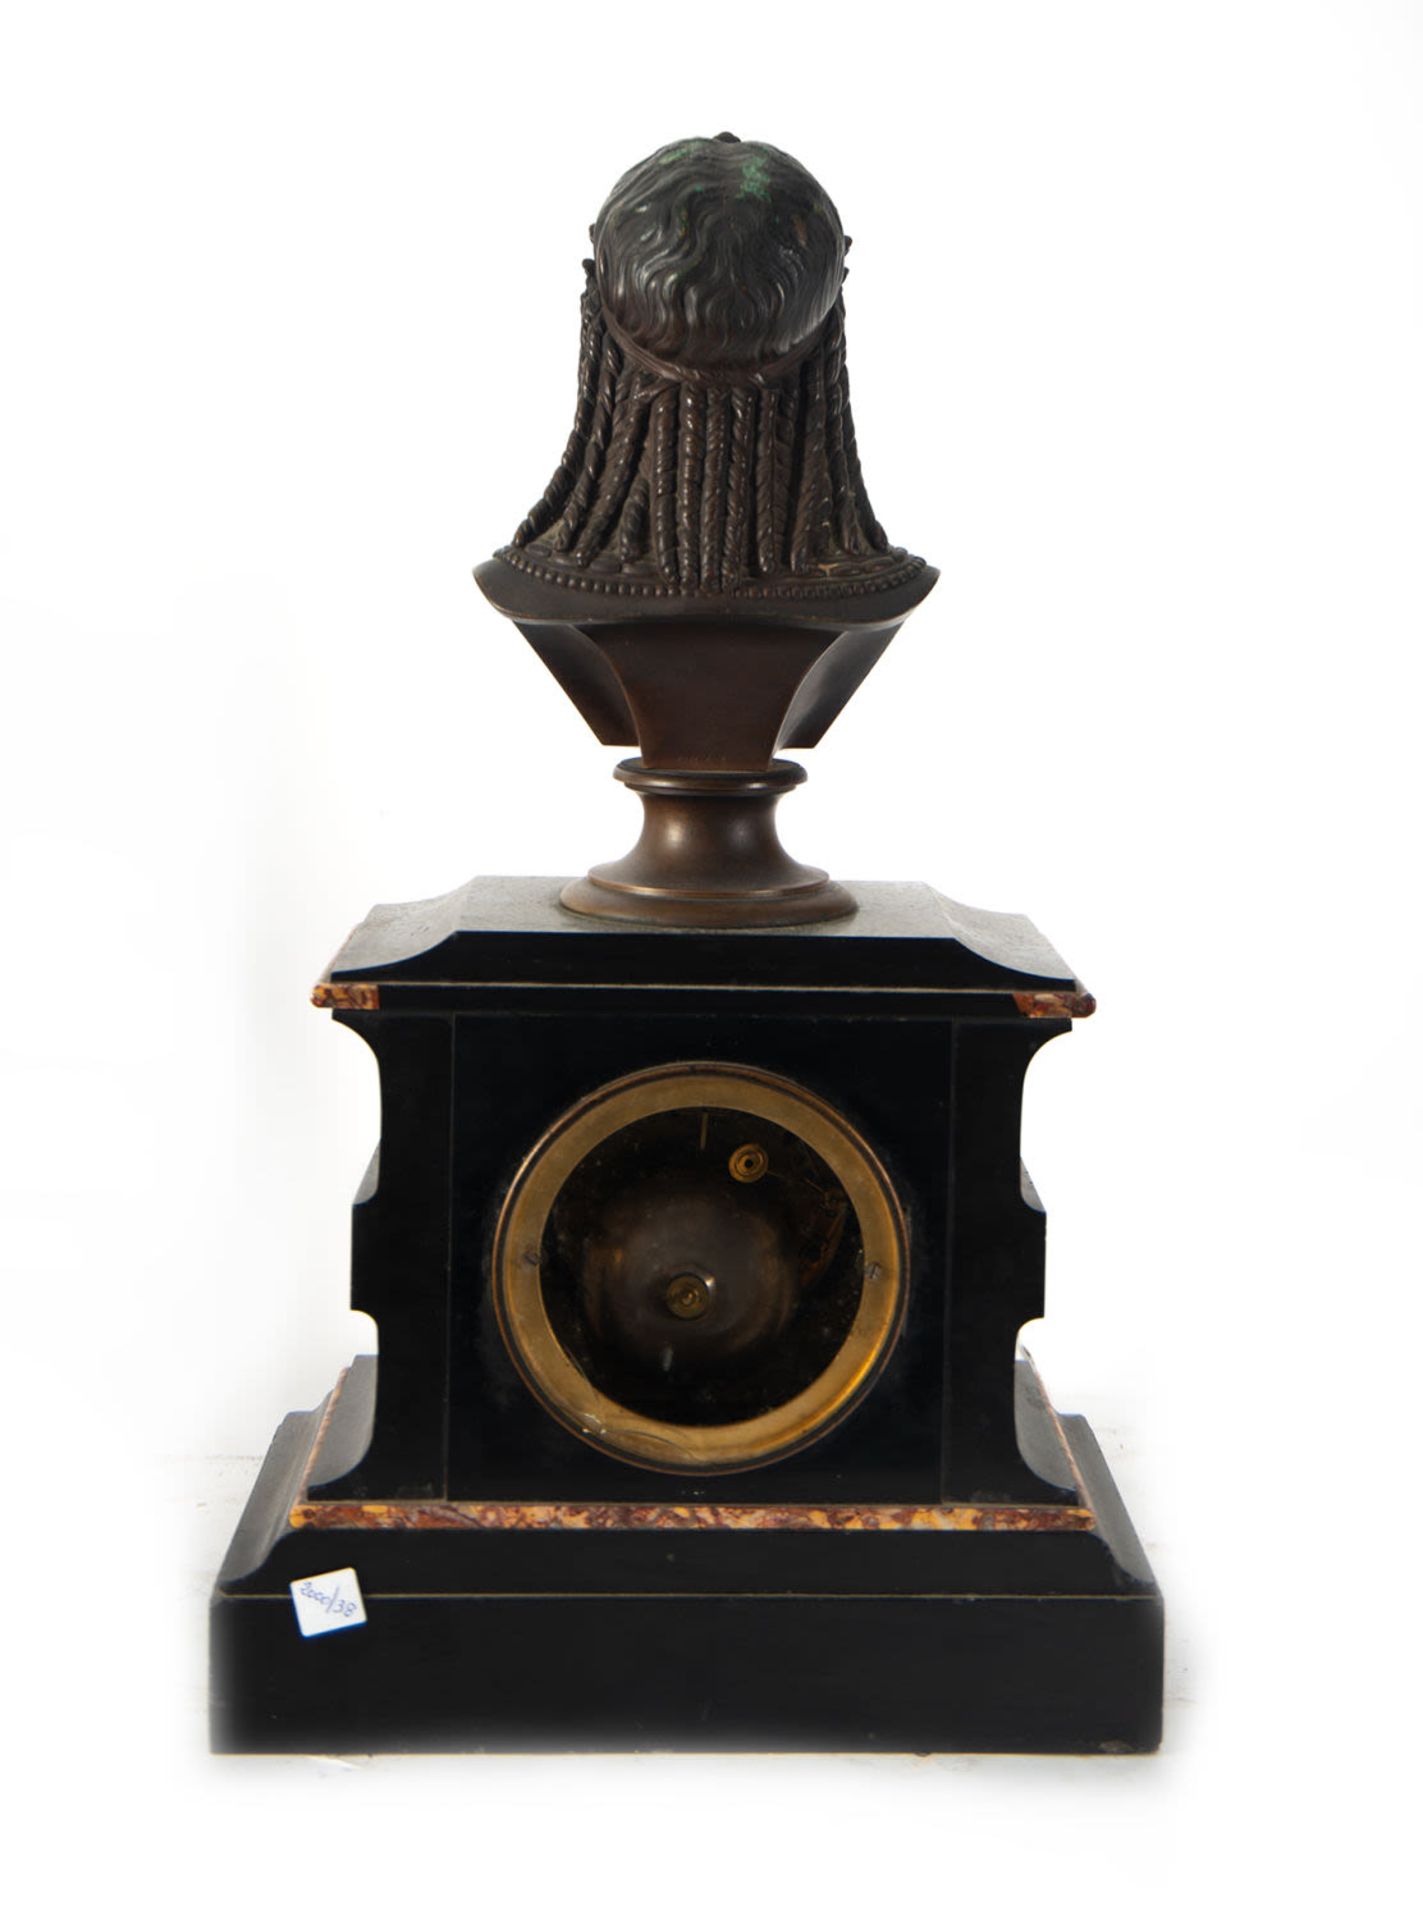 Table clock in red and black marble, with bronze bust of the Goddess Ceres, 19th century - Image 4 of 4